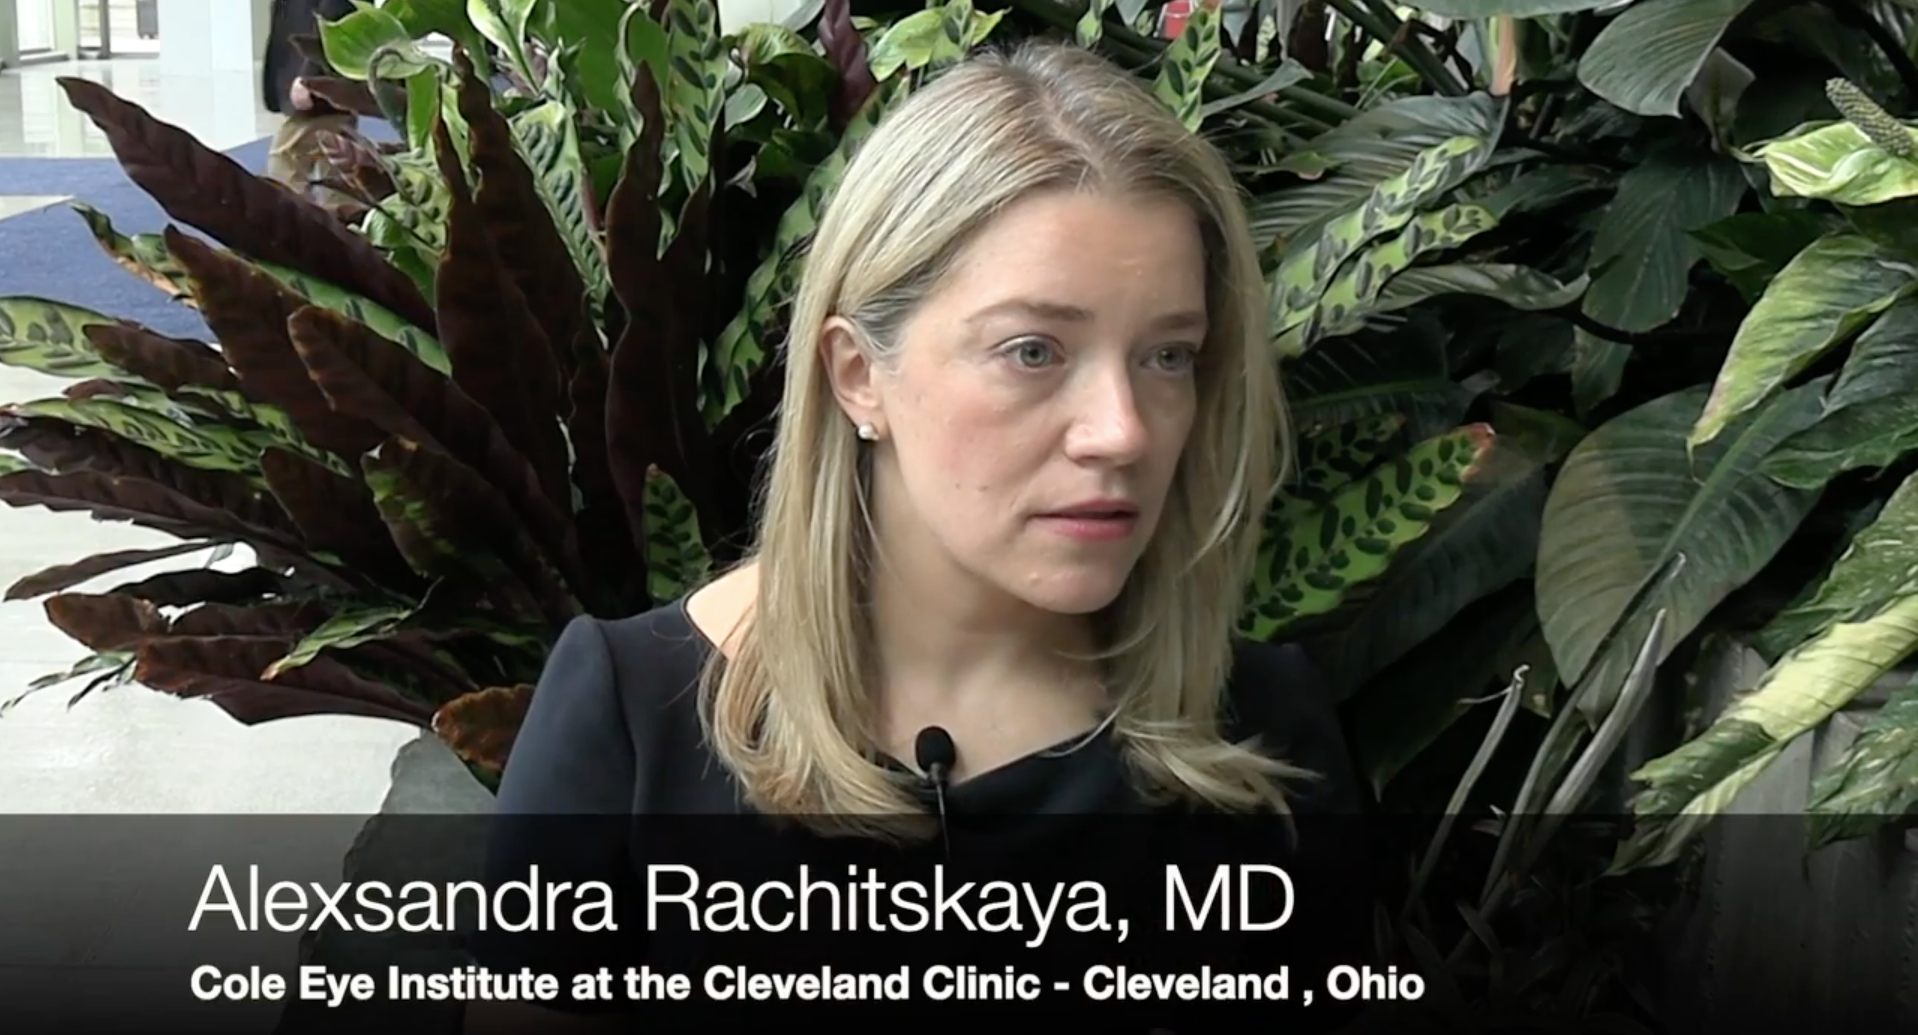 ASRS 2023: Aleksandra Rachiskaya, MD, shares insights on fluid control with faricimab compared to aflibercept in recent studies 